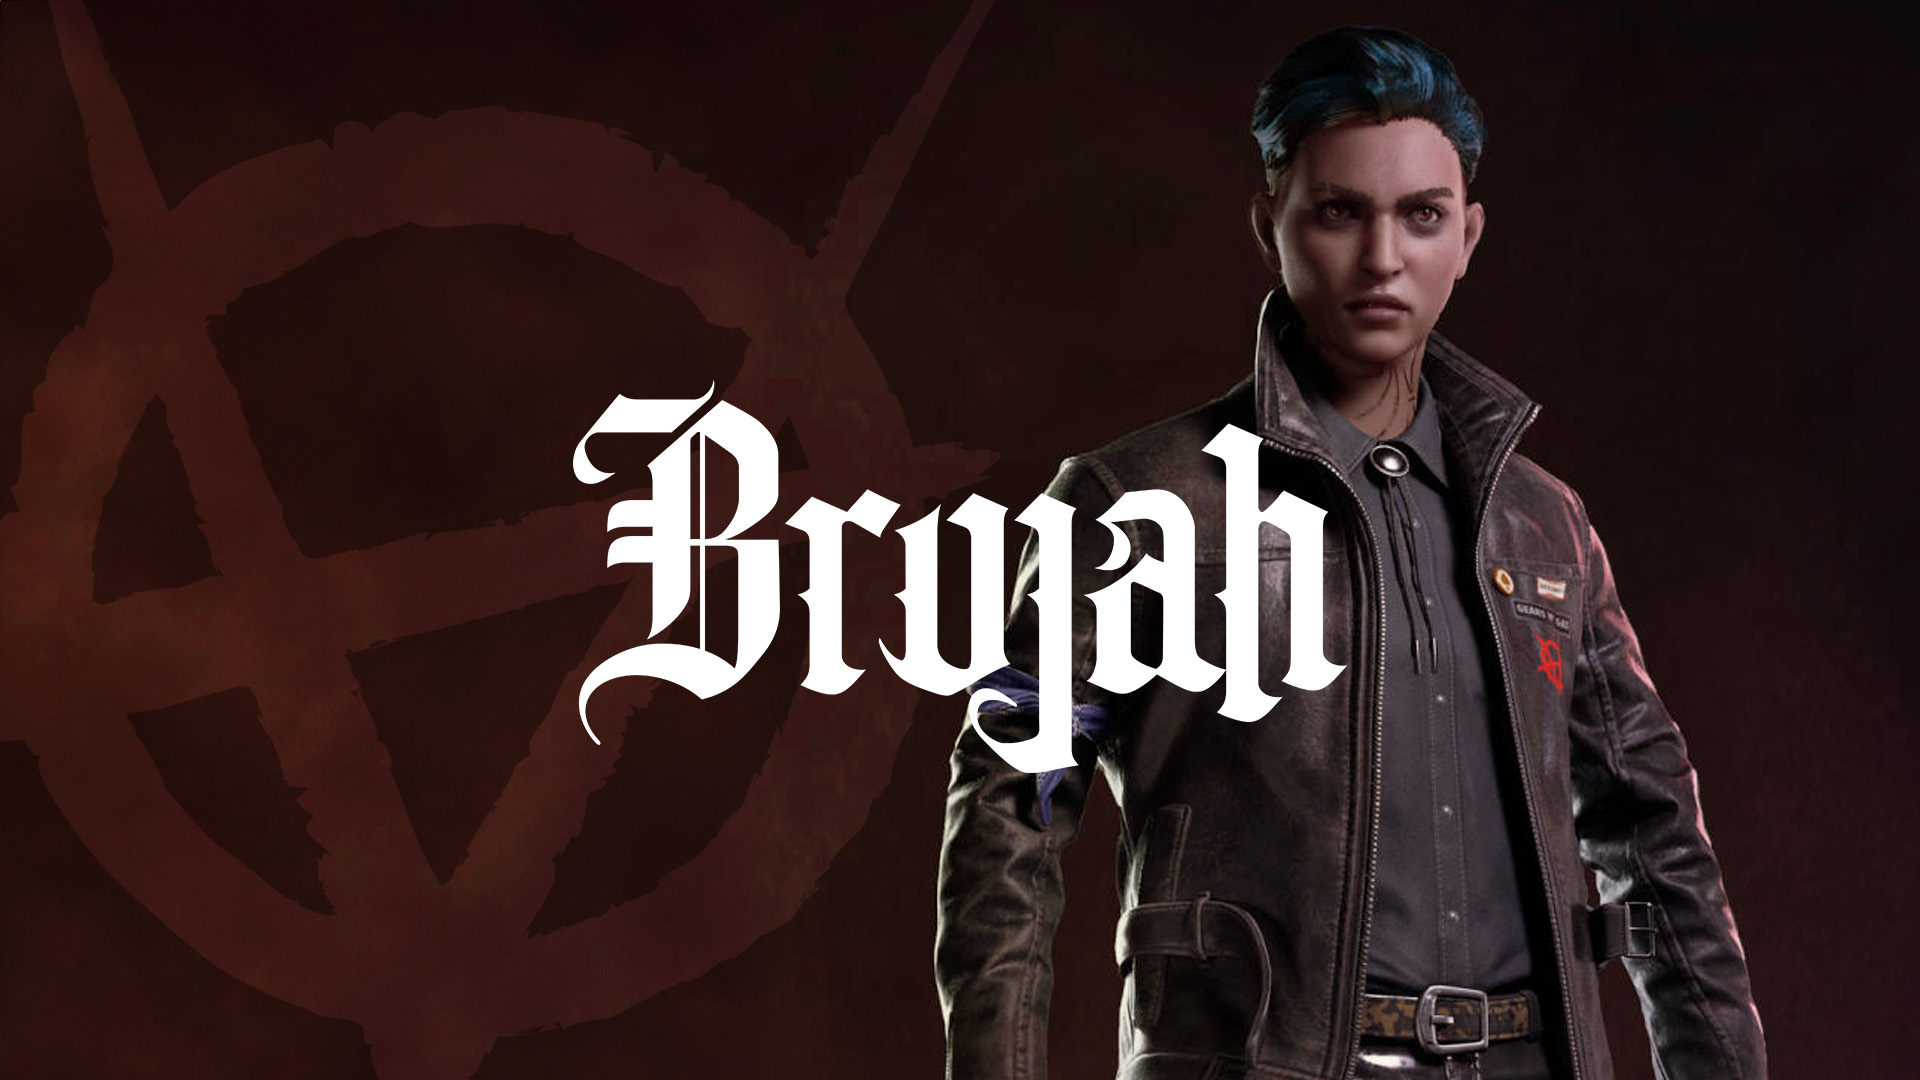 Vampire the Masquerade, Clans and Bloodlines, Brujah